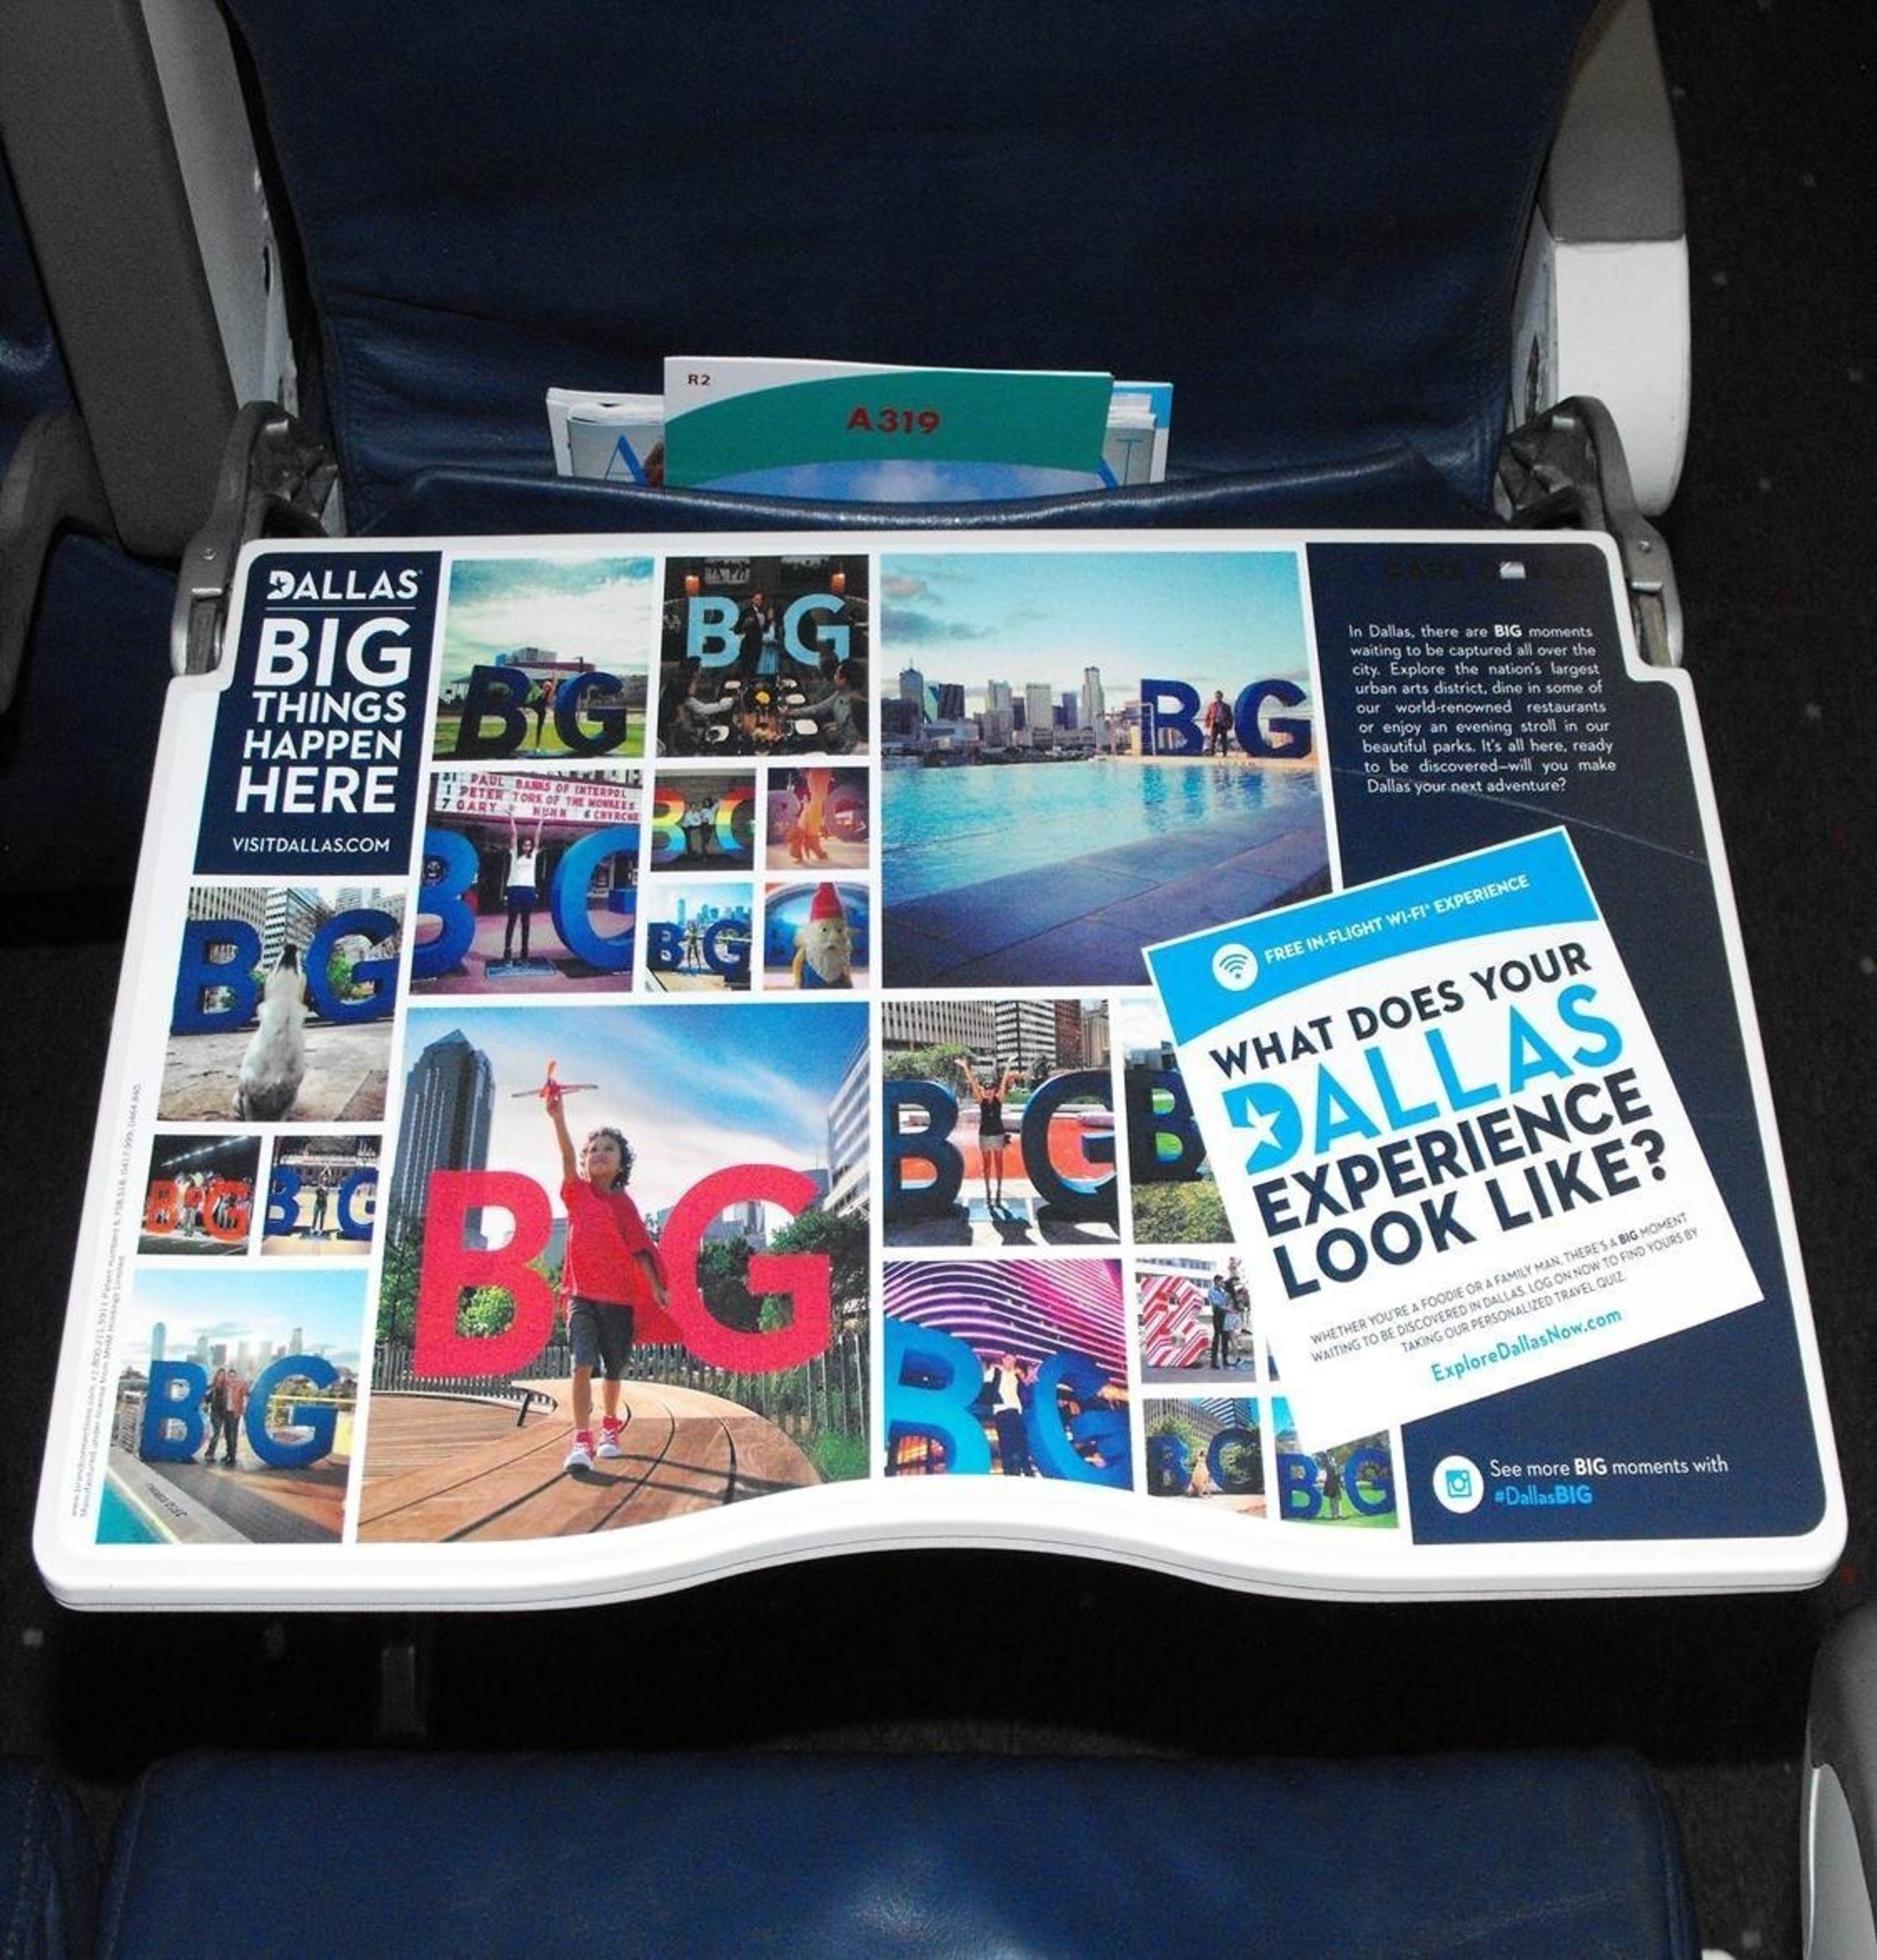 Dallas branded airline tray tables promote the city's "Big Things Happen Here" campaign, driving passengers to explore Dallas mid-air via a whimsical and interactive online game.